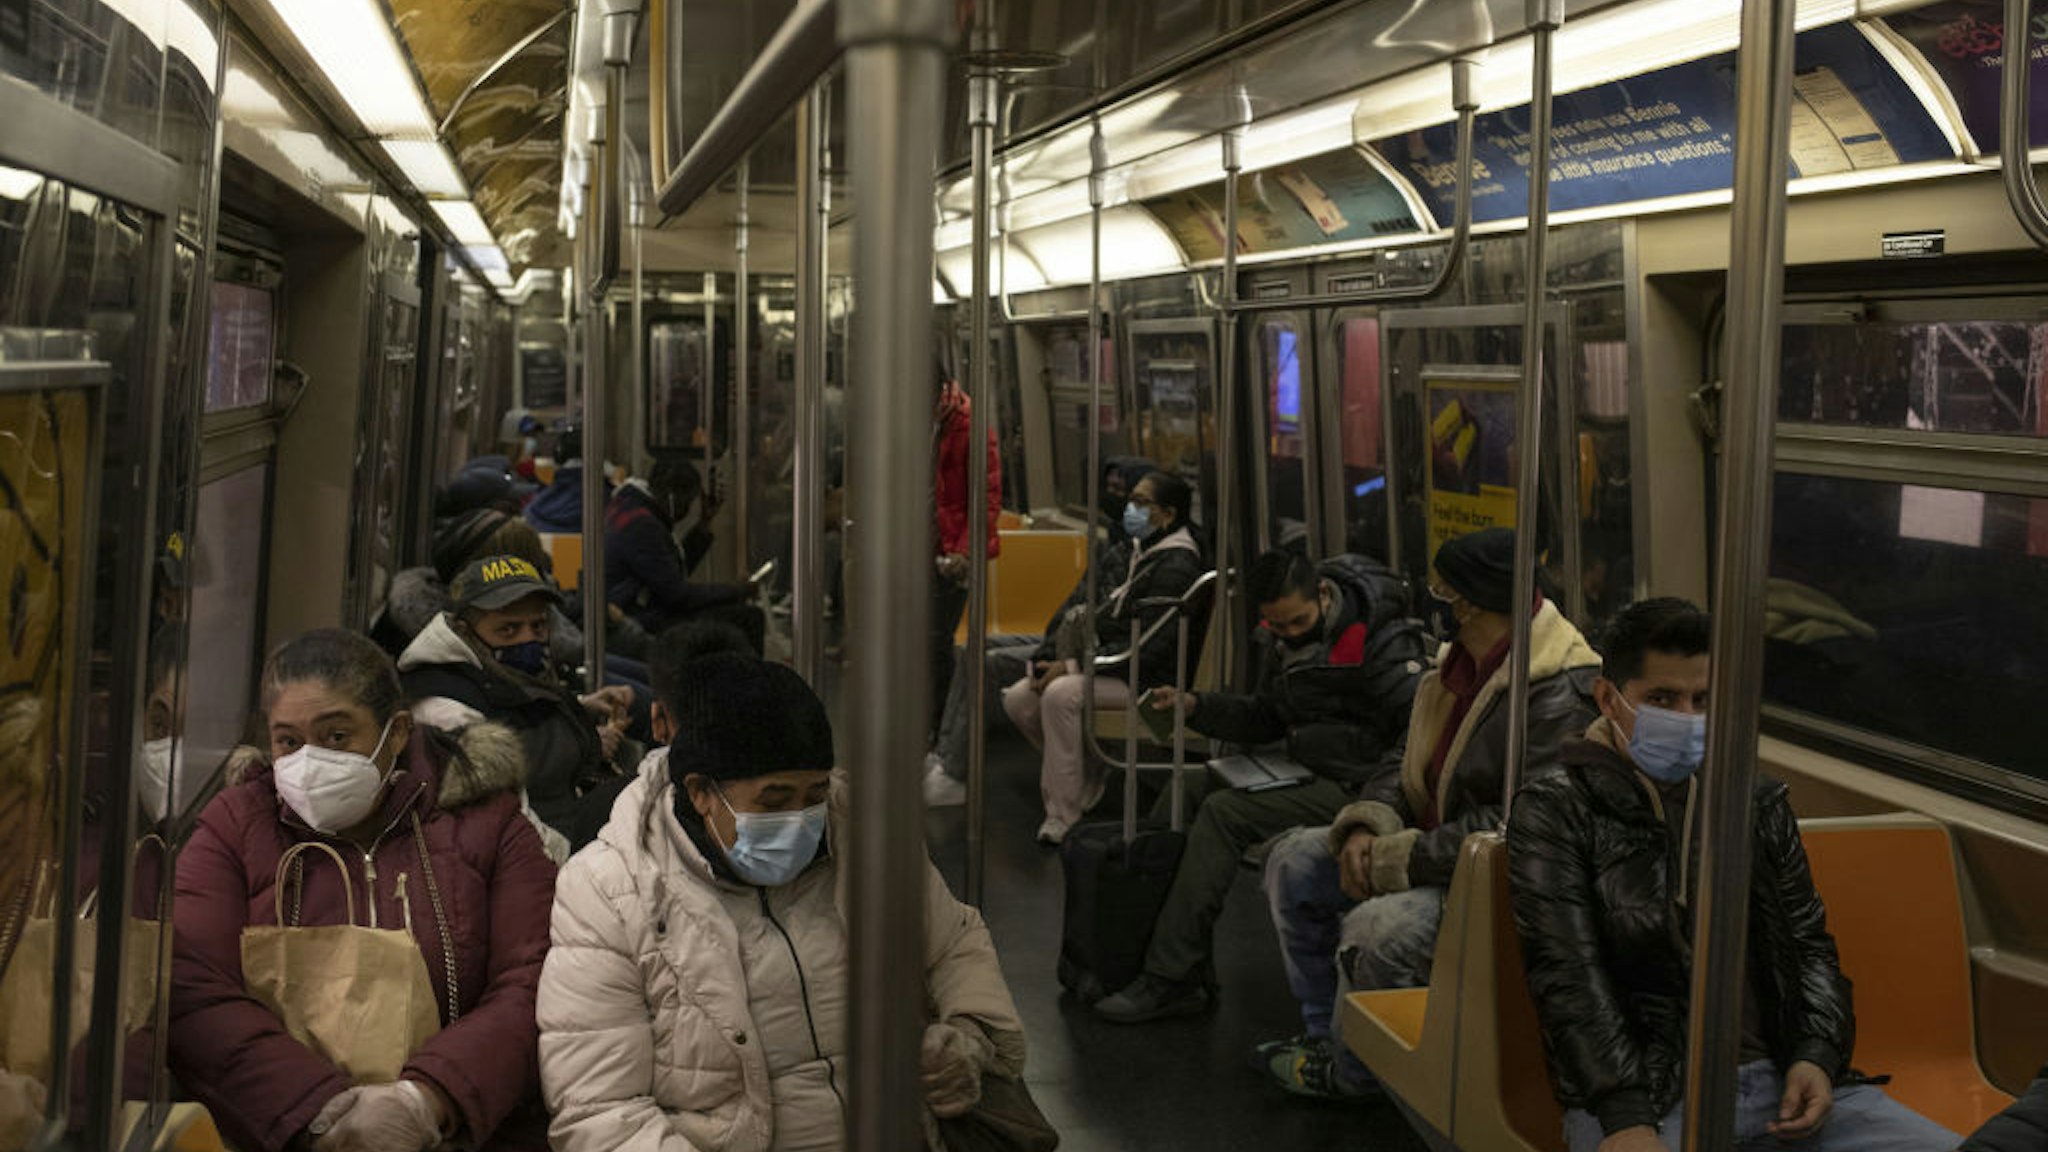 Commuters wearing protective masks travel in a subway train in New York, U.S., on Thursday, Dec. 10, 2020. New York City had its credit rating cut by Fitch Ratings because of the impact the coronavirus pandemic is having on the city's economy.